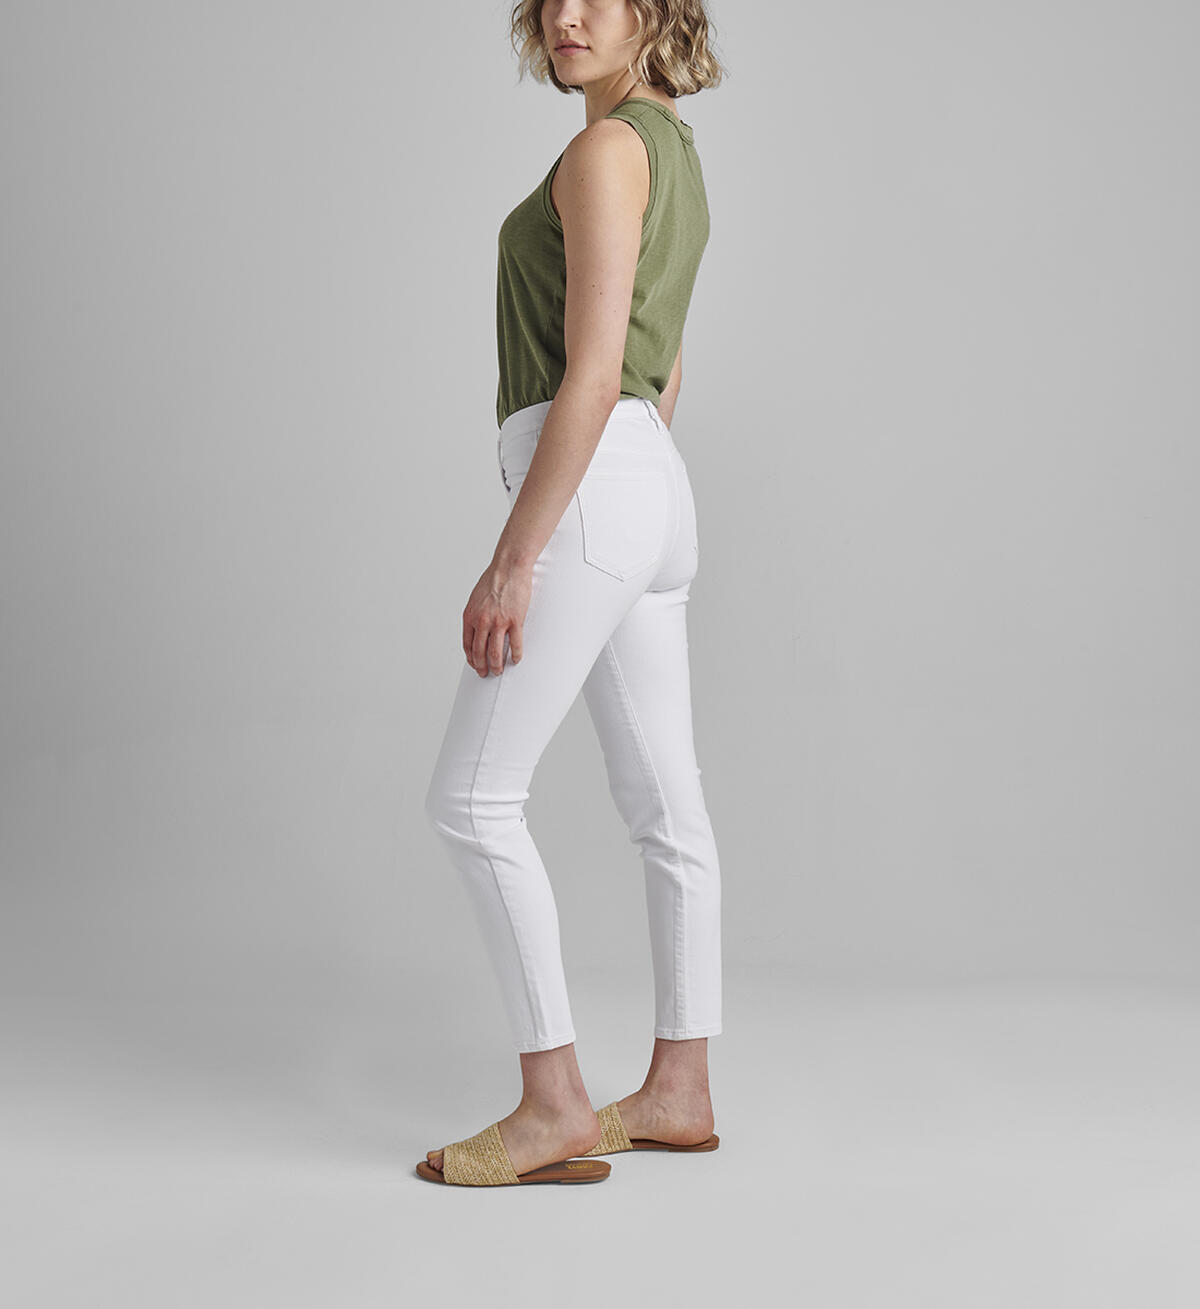 Cecilia Mid Rise Skinny Jeans, , hi-res image number 2